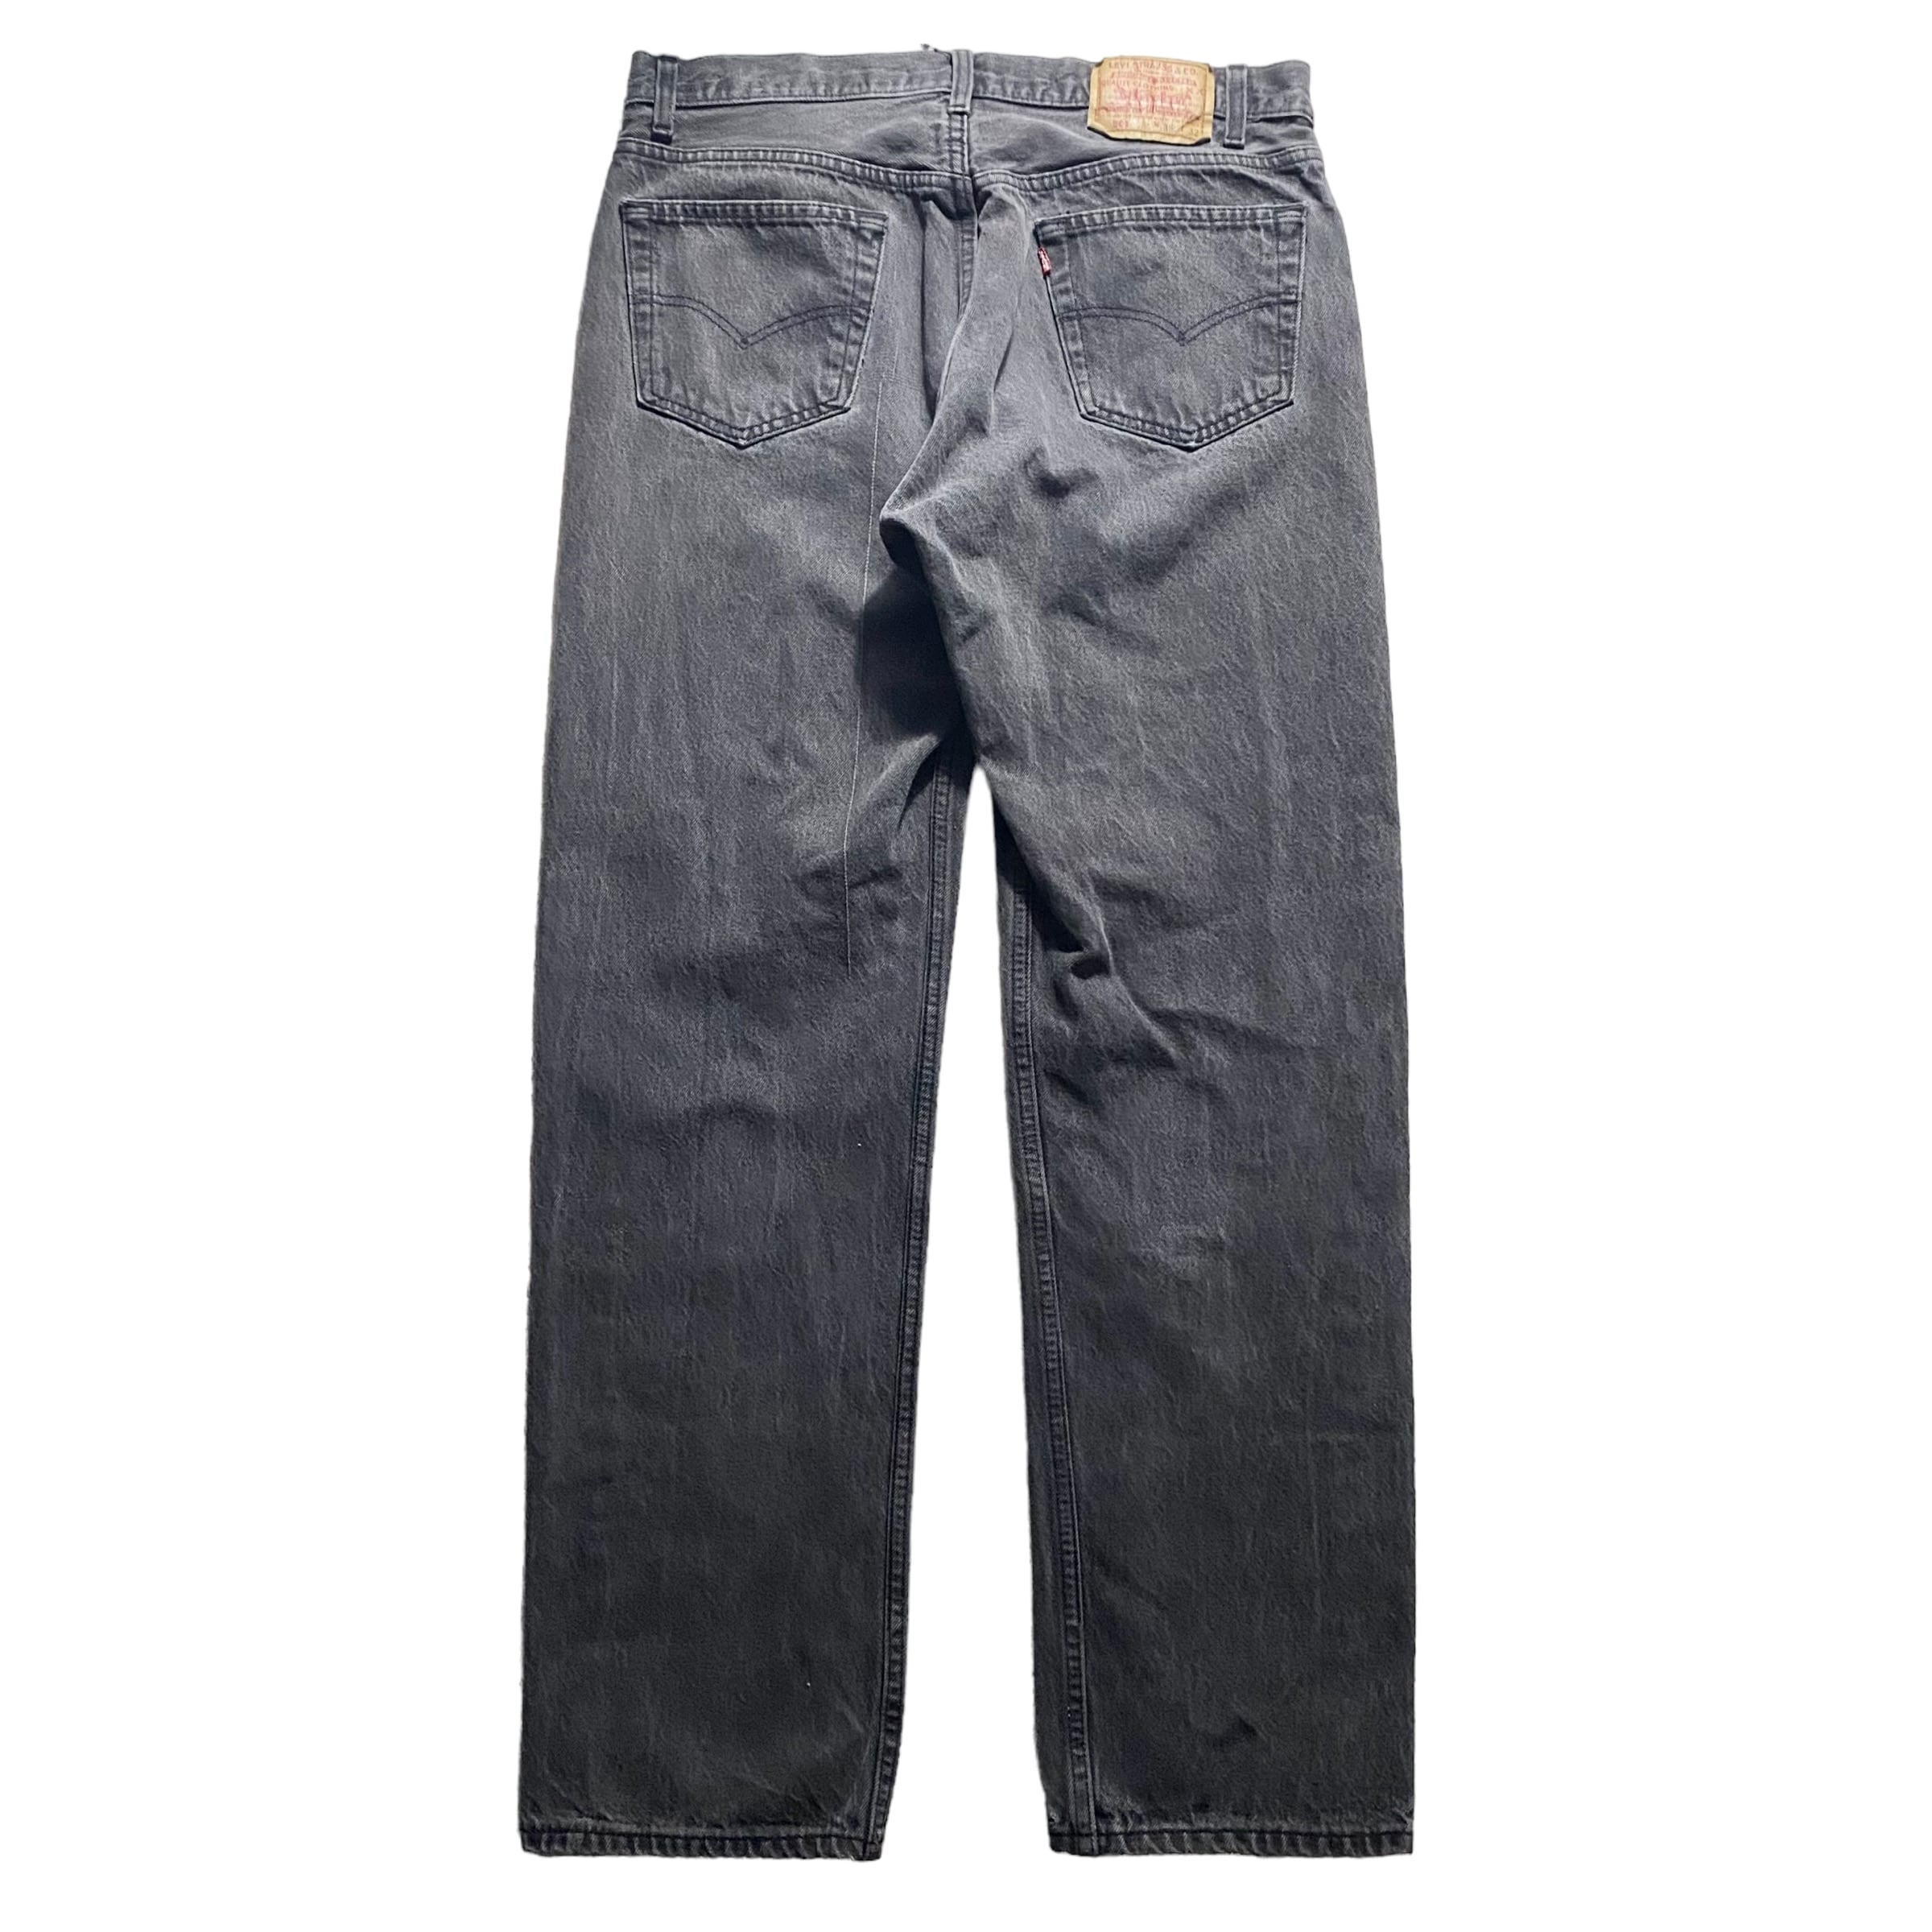 LEVI’S 501 black denim pants made in USA | NOIR ONLINE powered by BASE